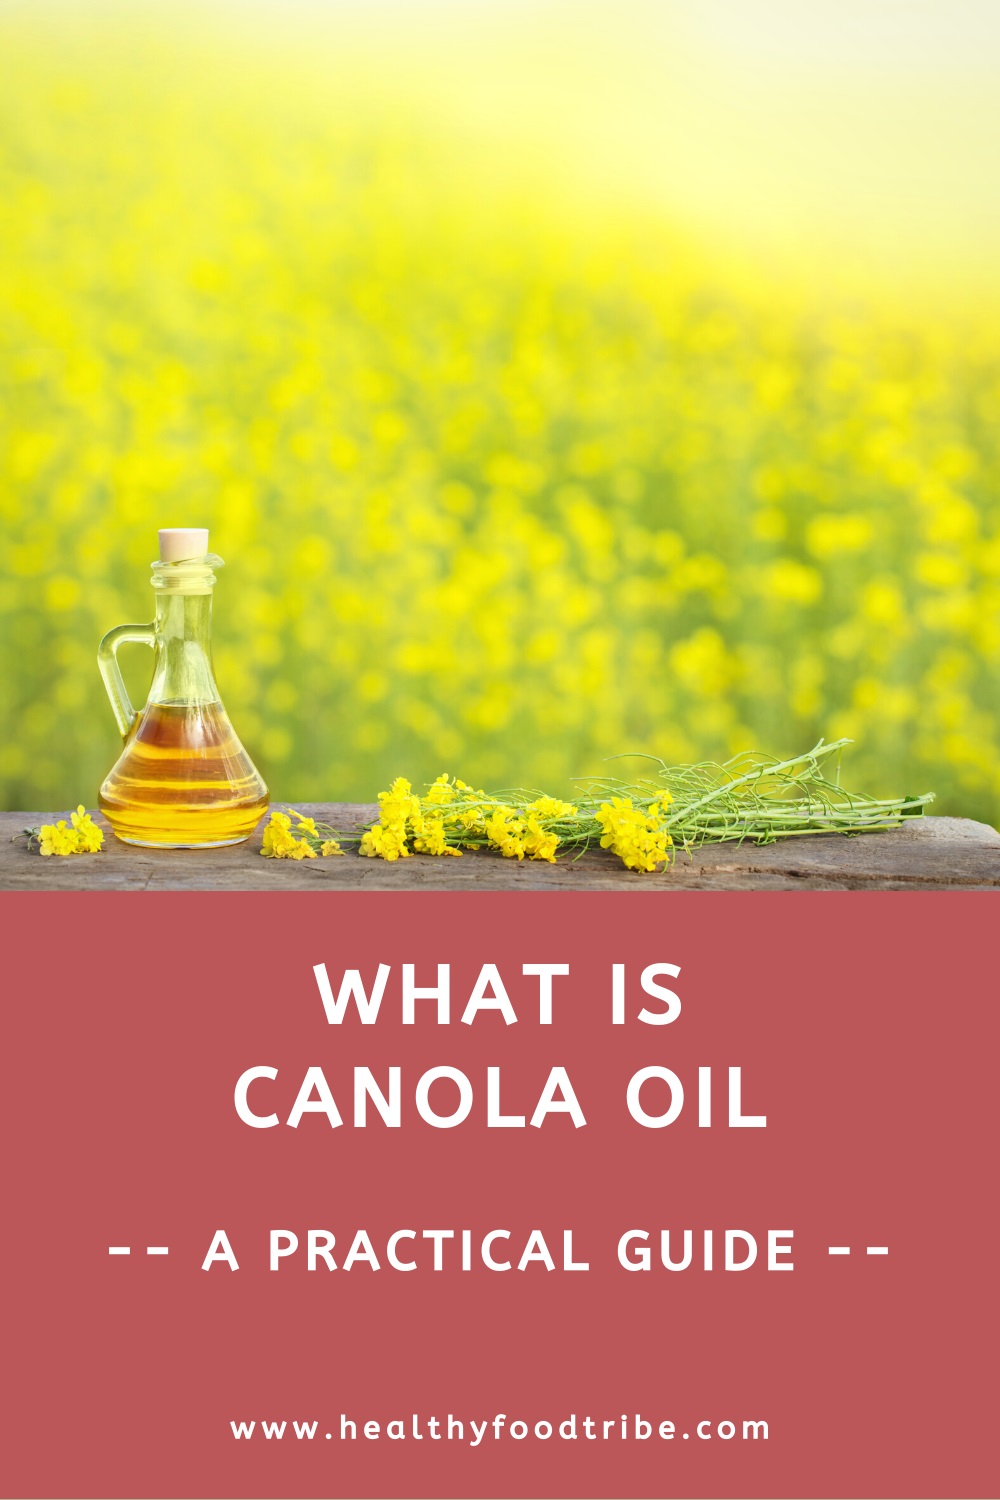 What is canola oil? (a practical guide)